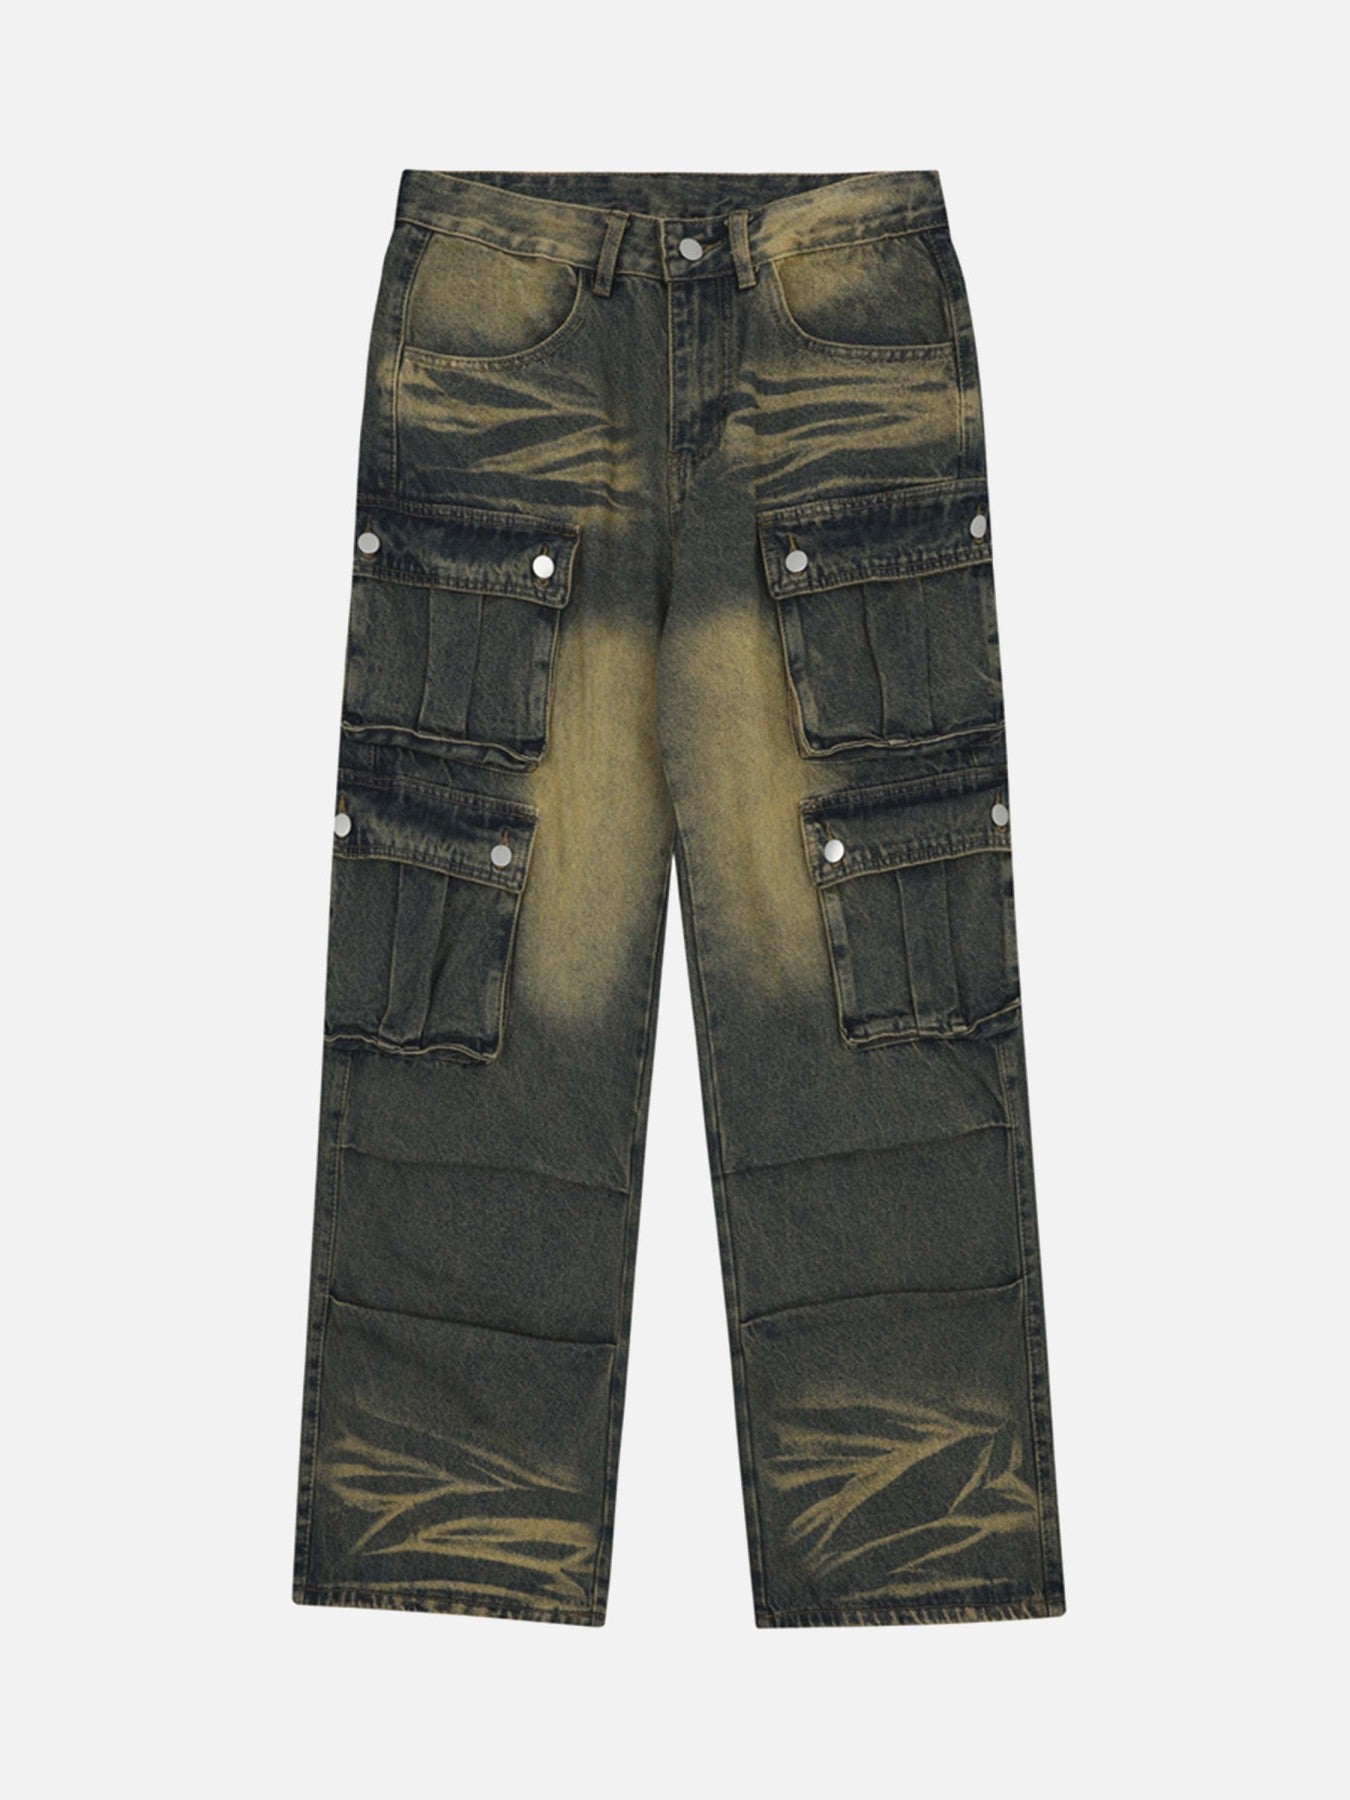 Thesupermade Multi-pocket Cargo Jeans - 1919